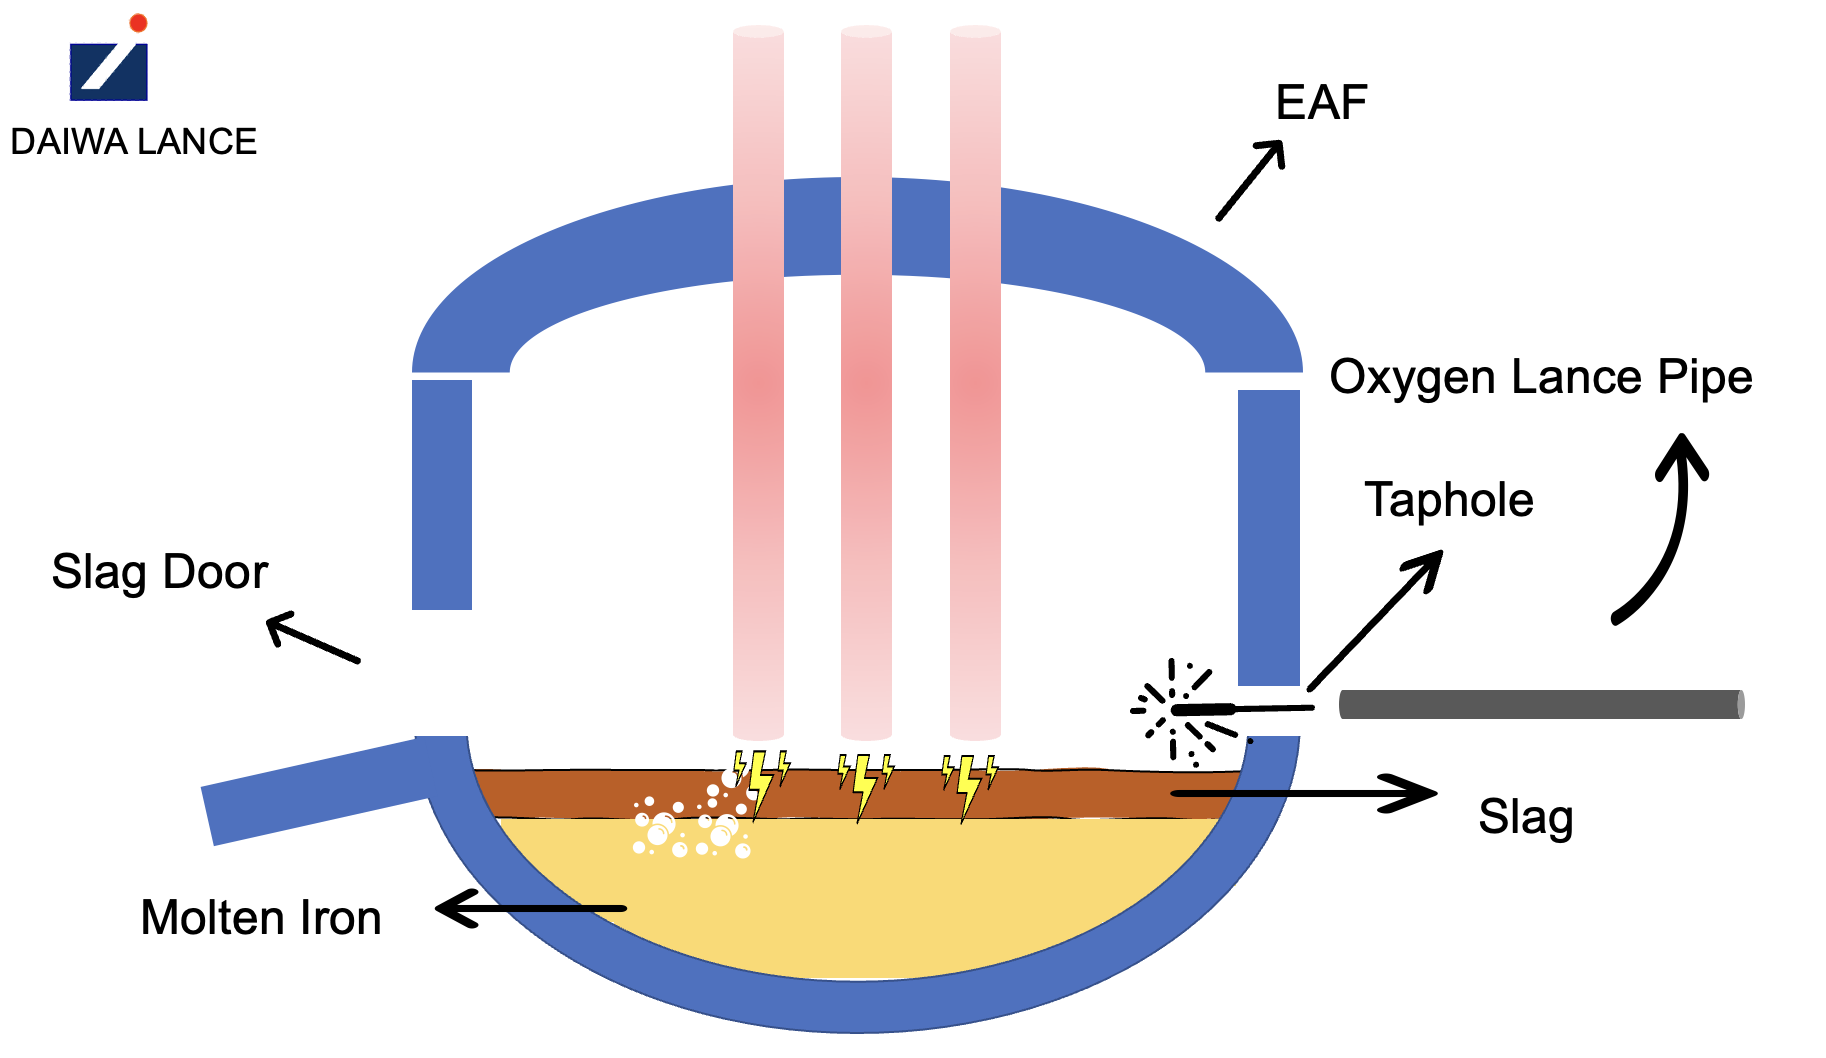 An illustration diagram of the taphole and oxygen lance pipe in Electric Arc Furnace (EAF)